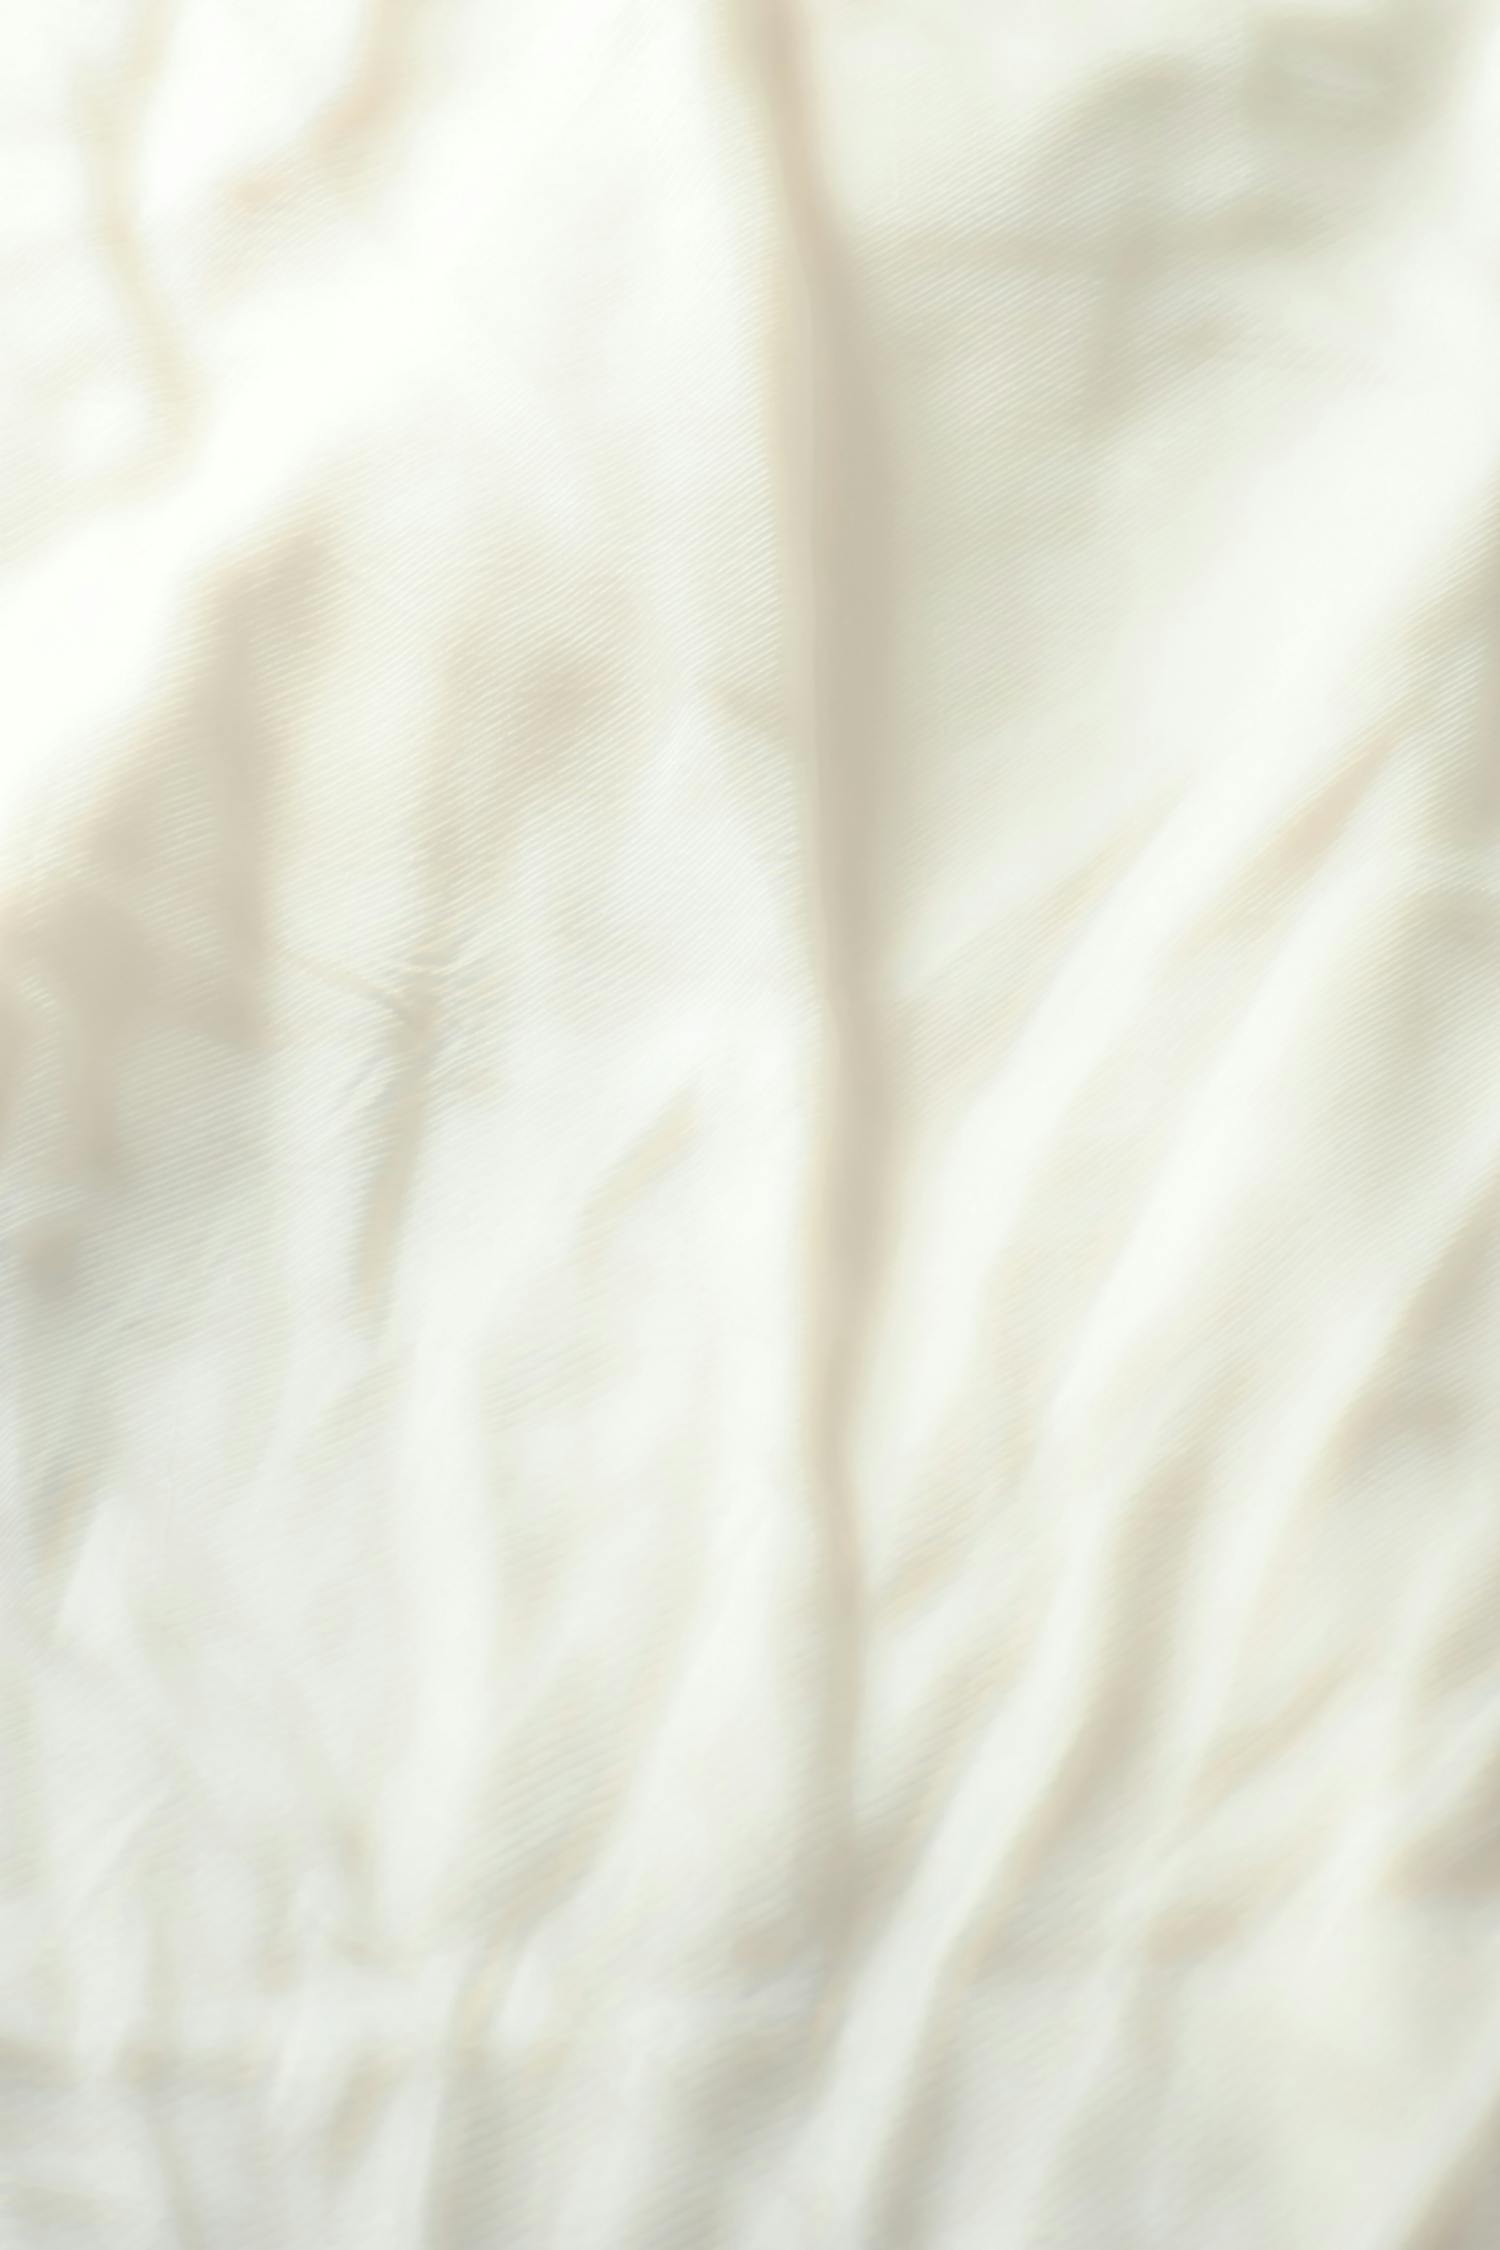 White Textile in Close Up Photography · Free Stock Photo